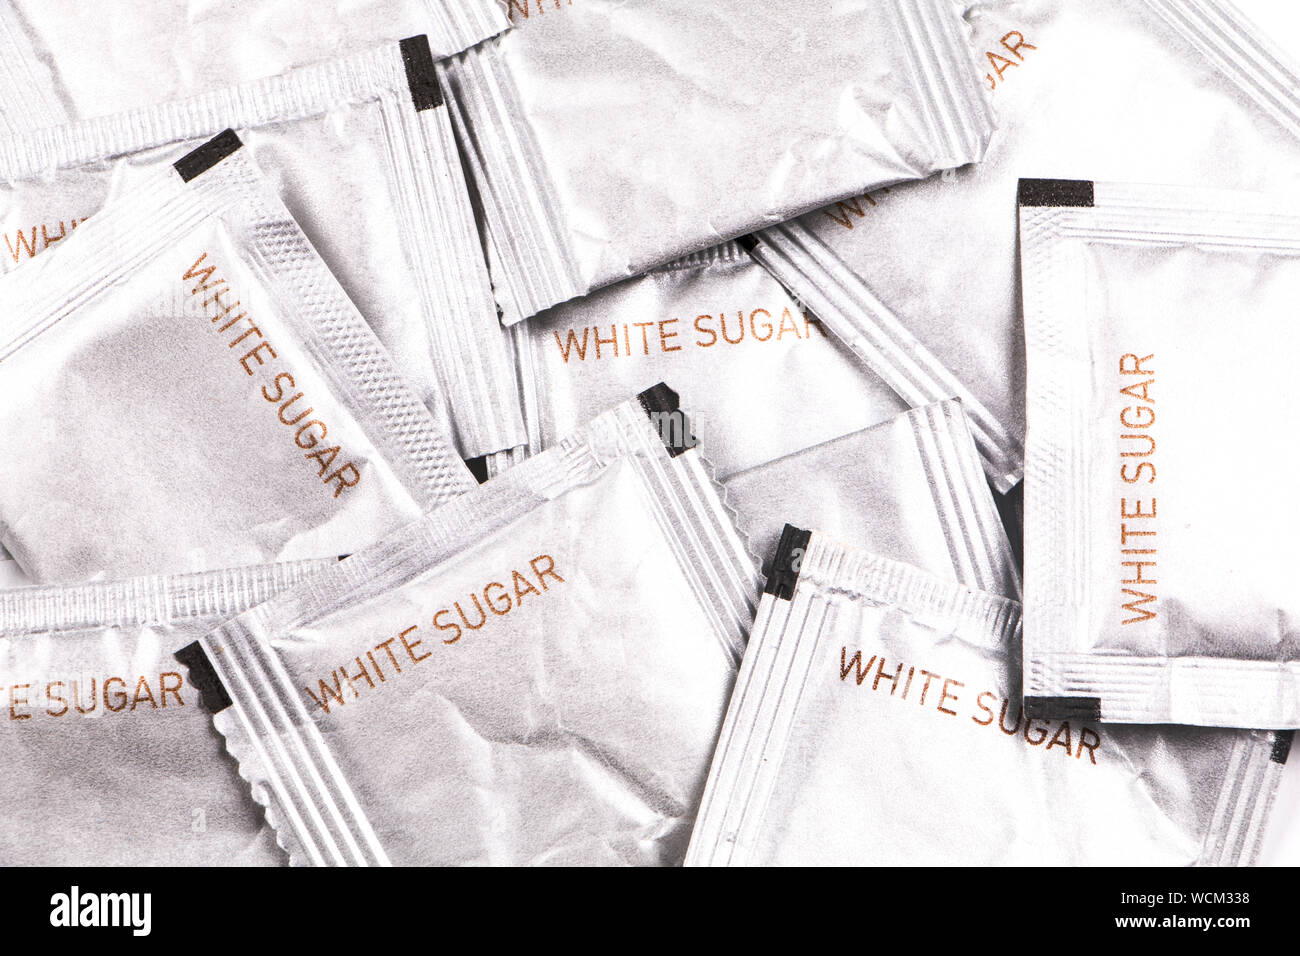 Close Up Of White Sugar Packages Stock Photo